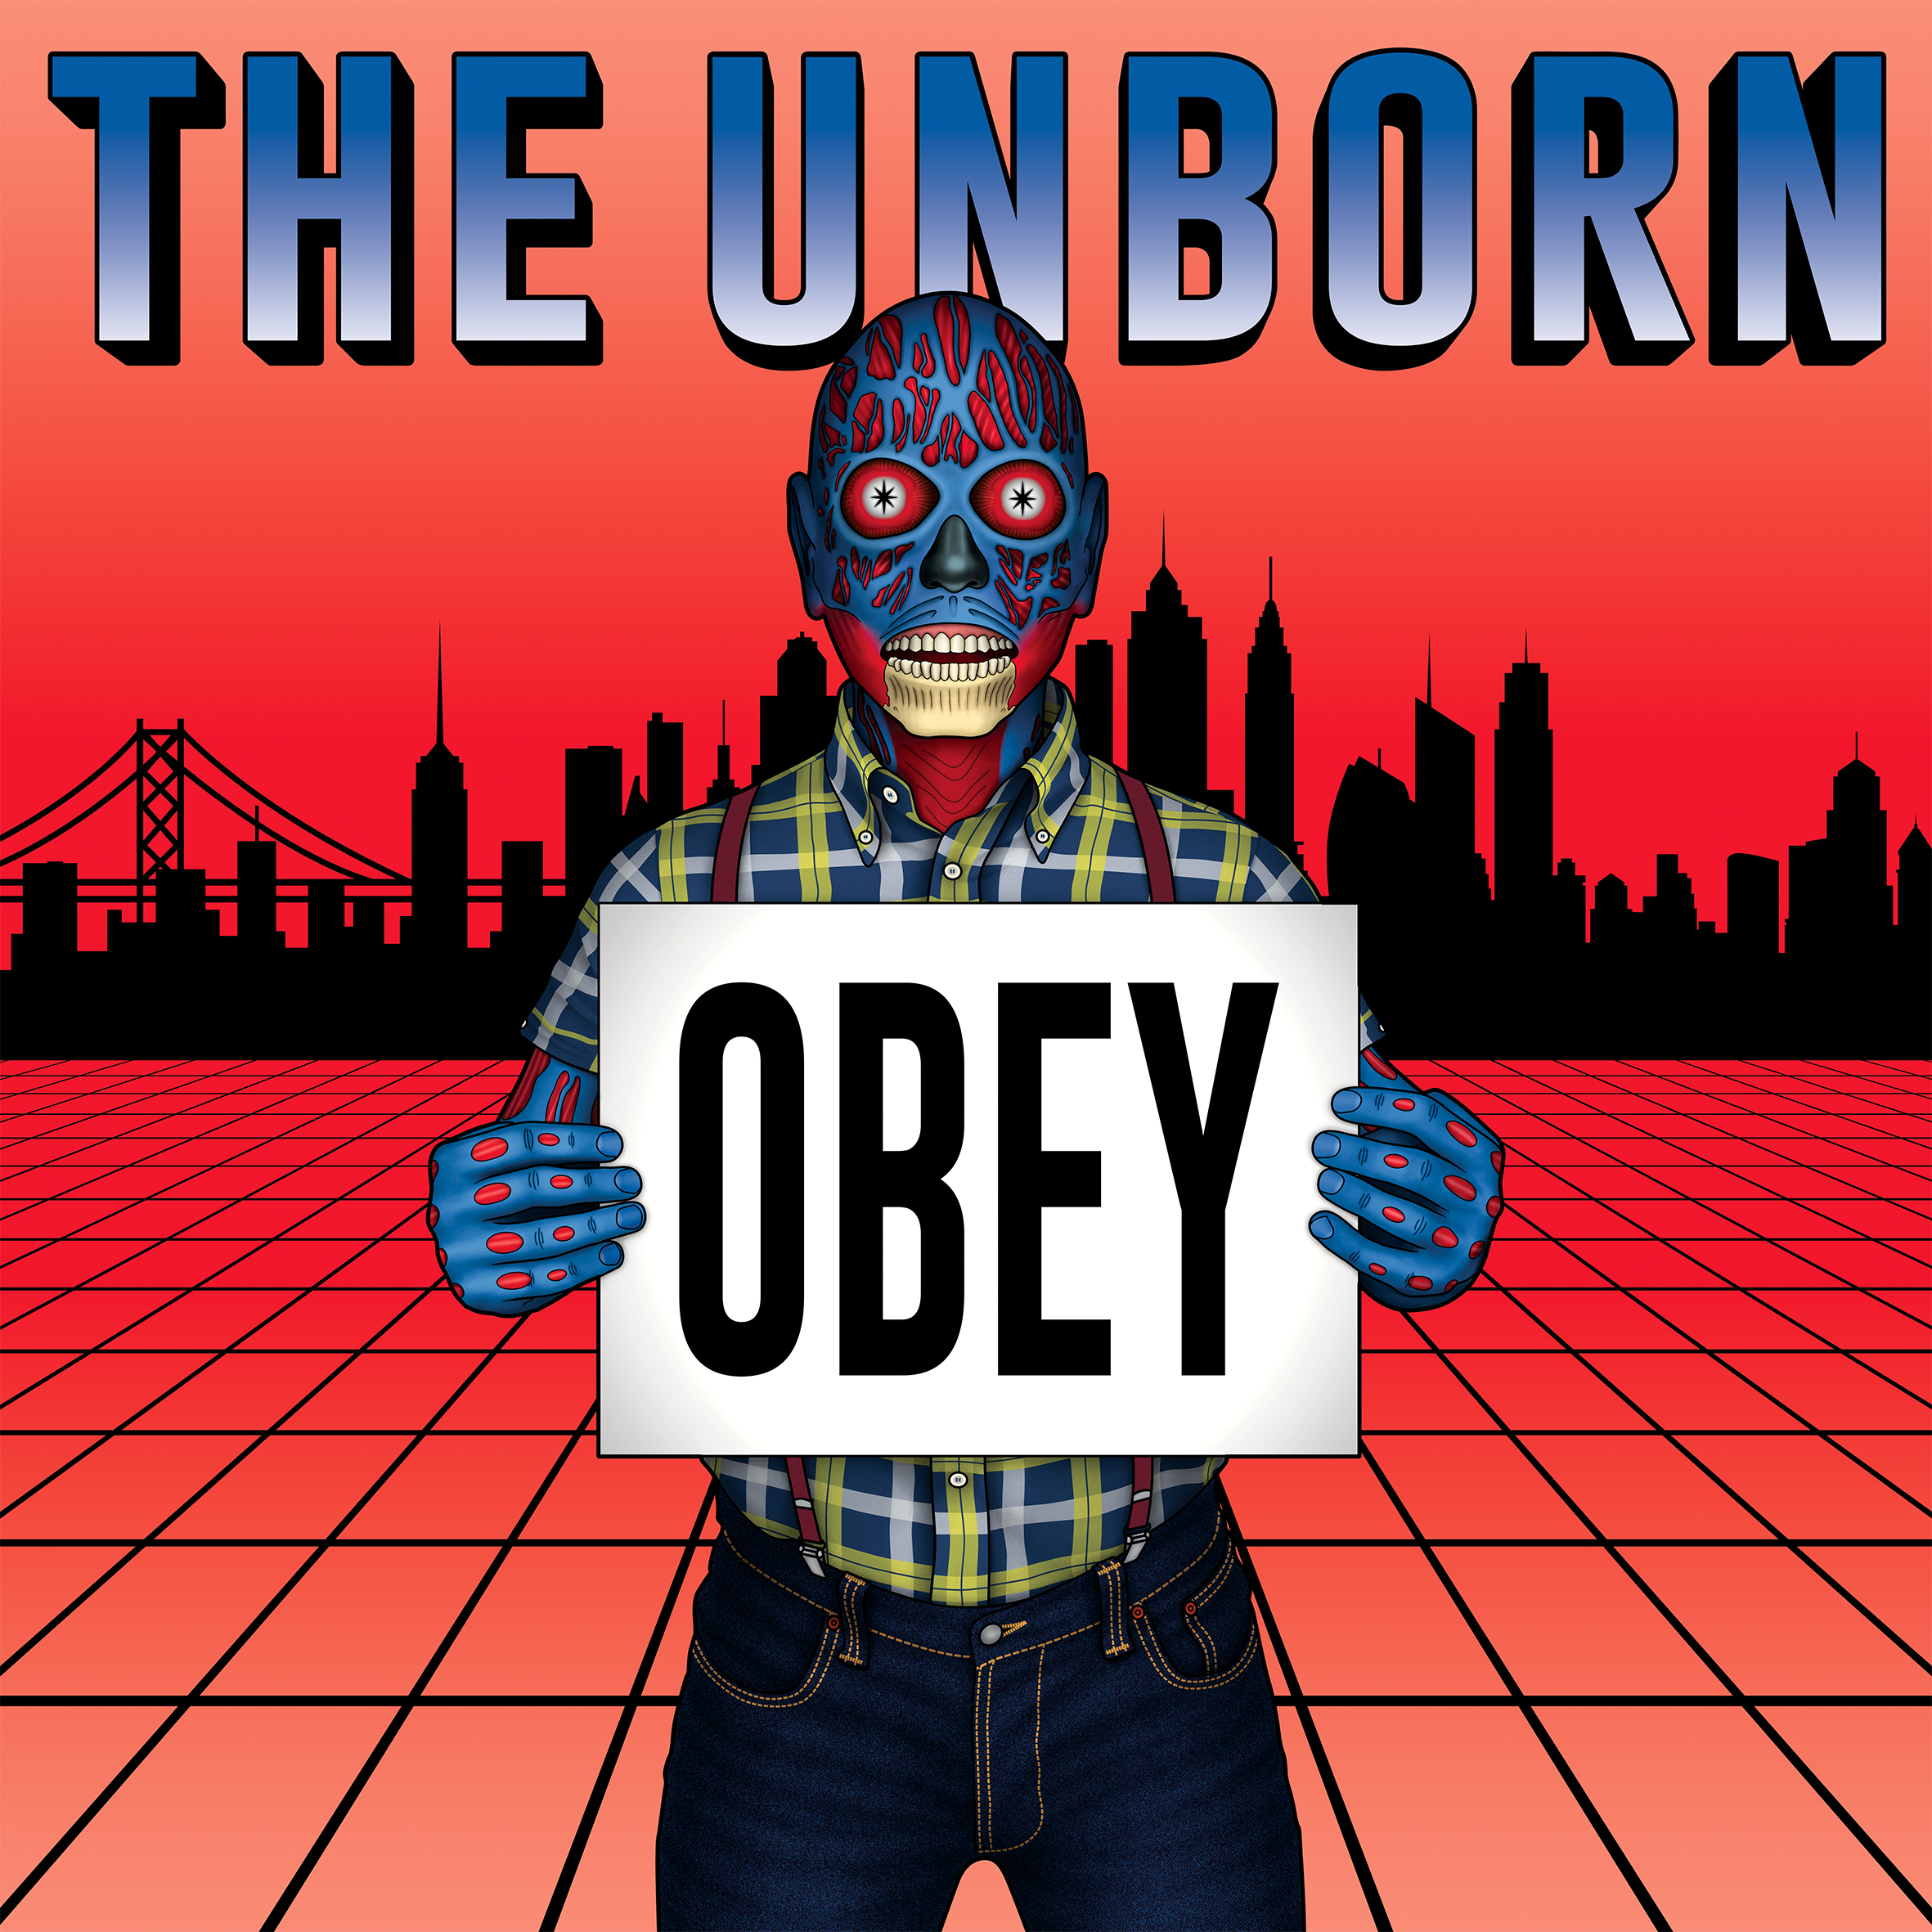 The Unborn "Obey"